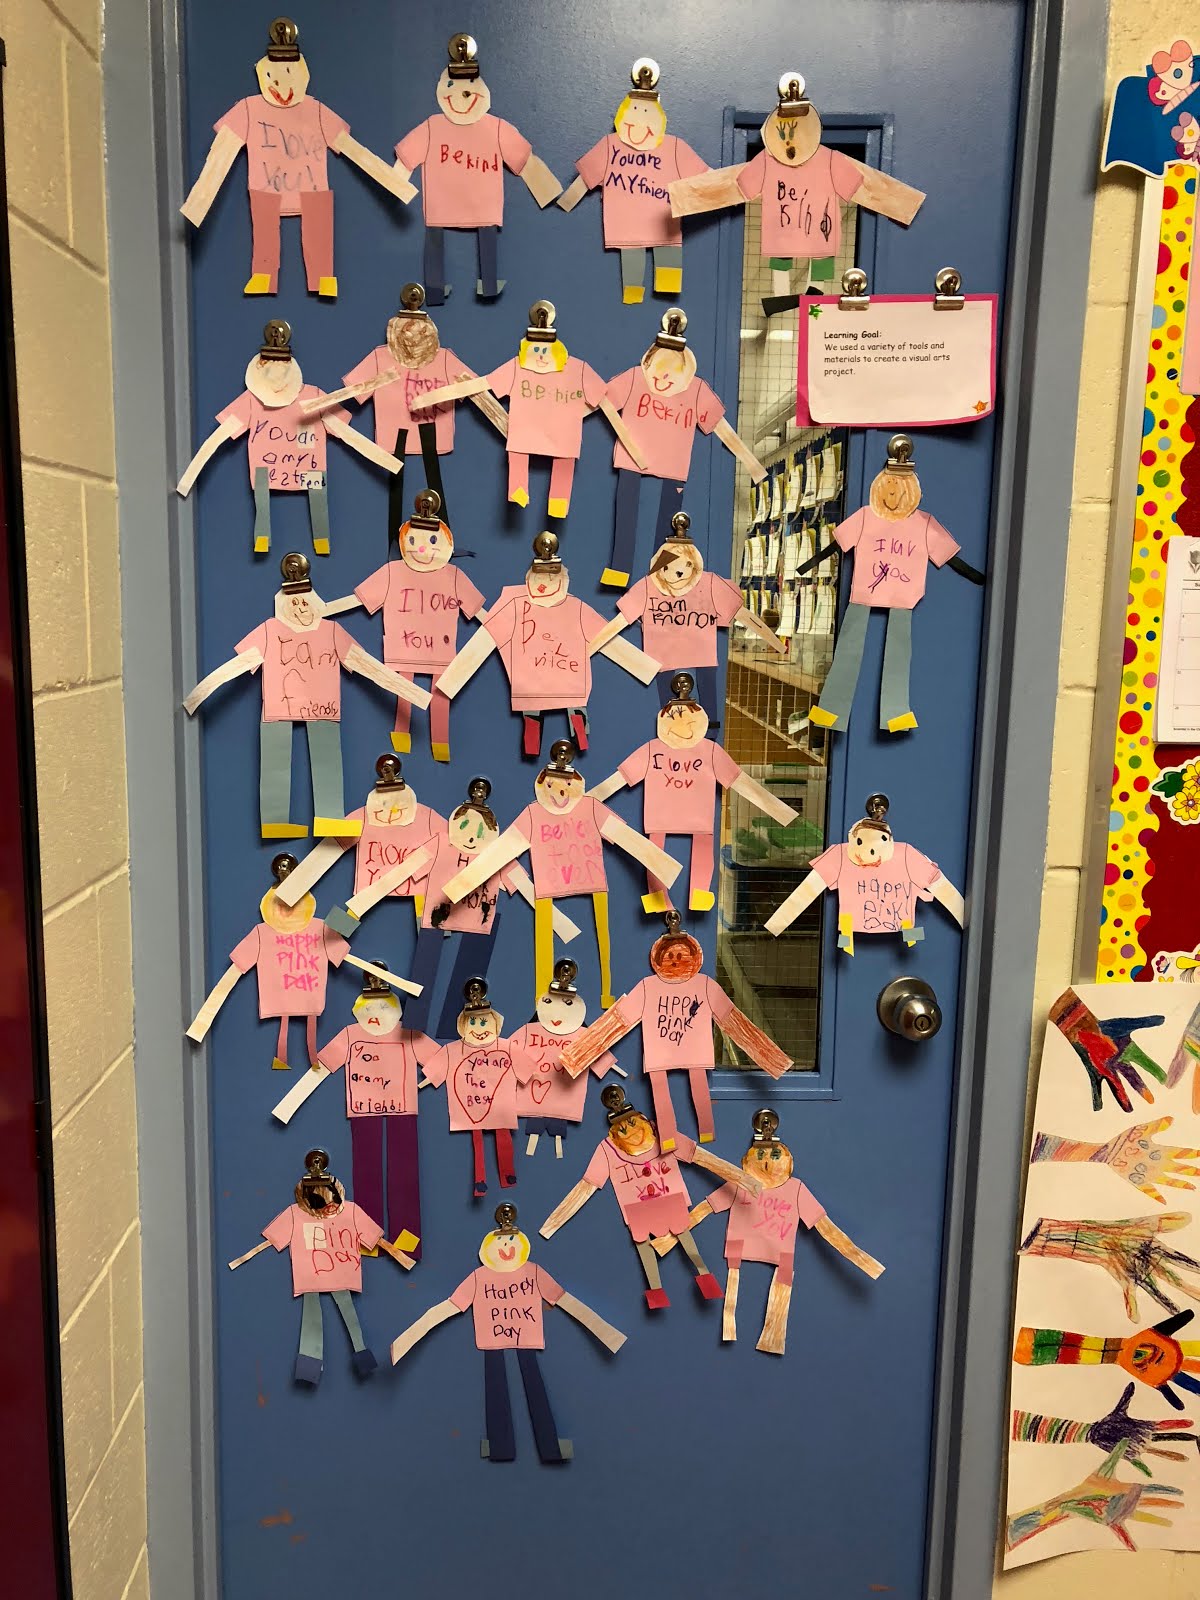 Celebrating Pink Day learning